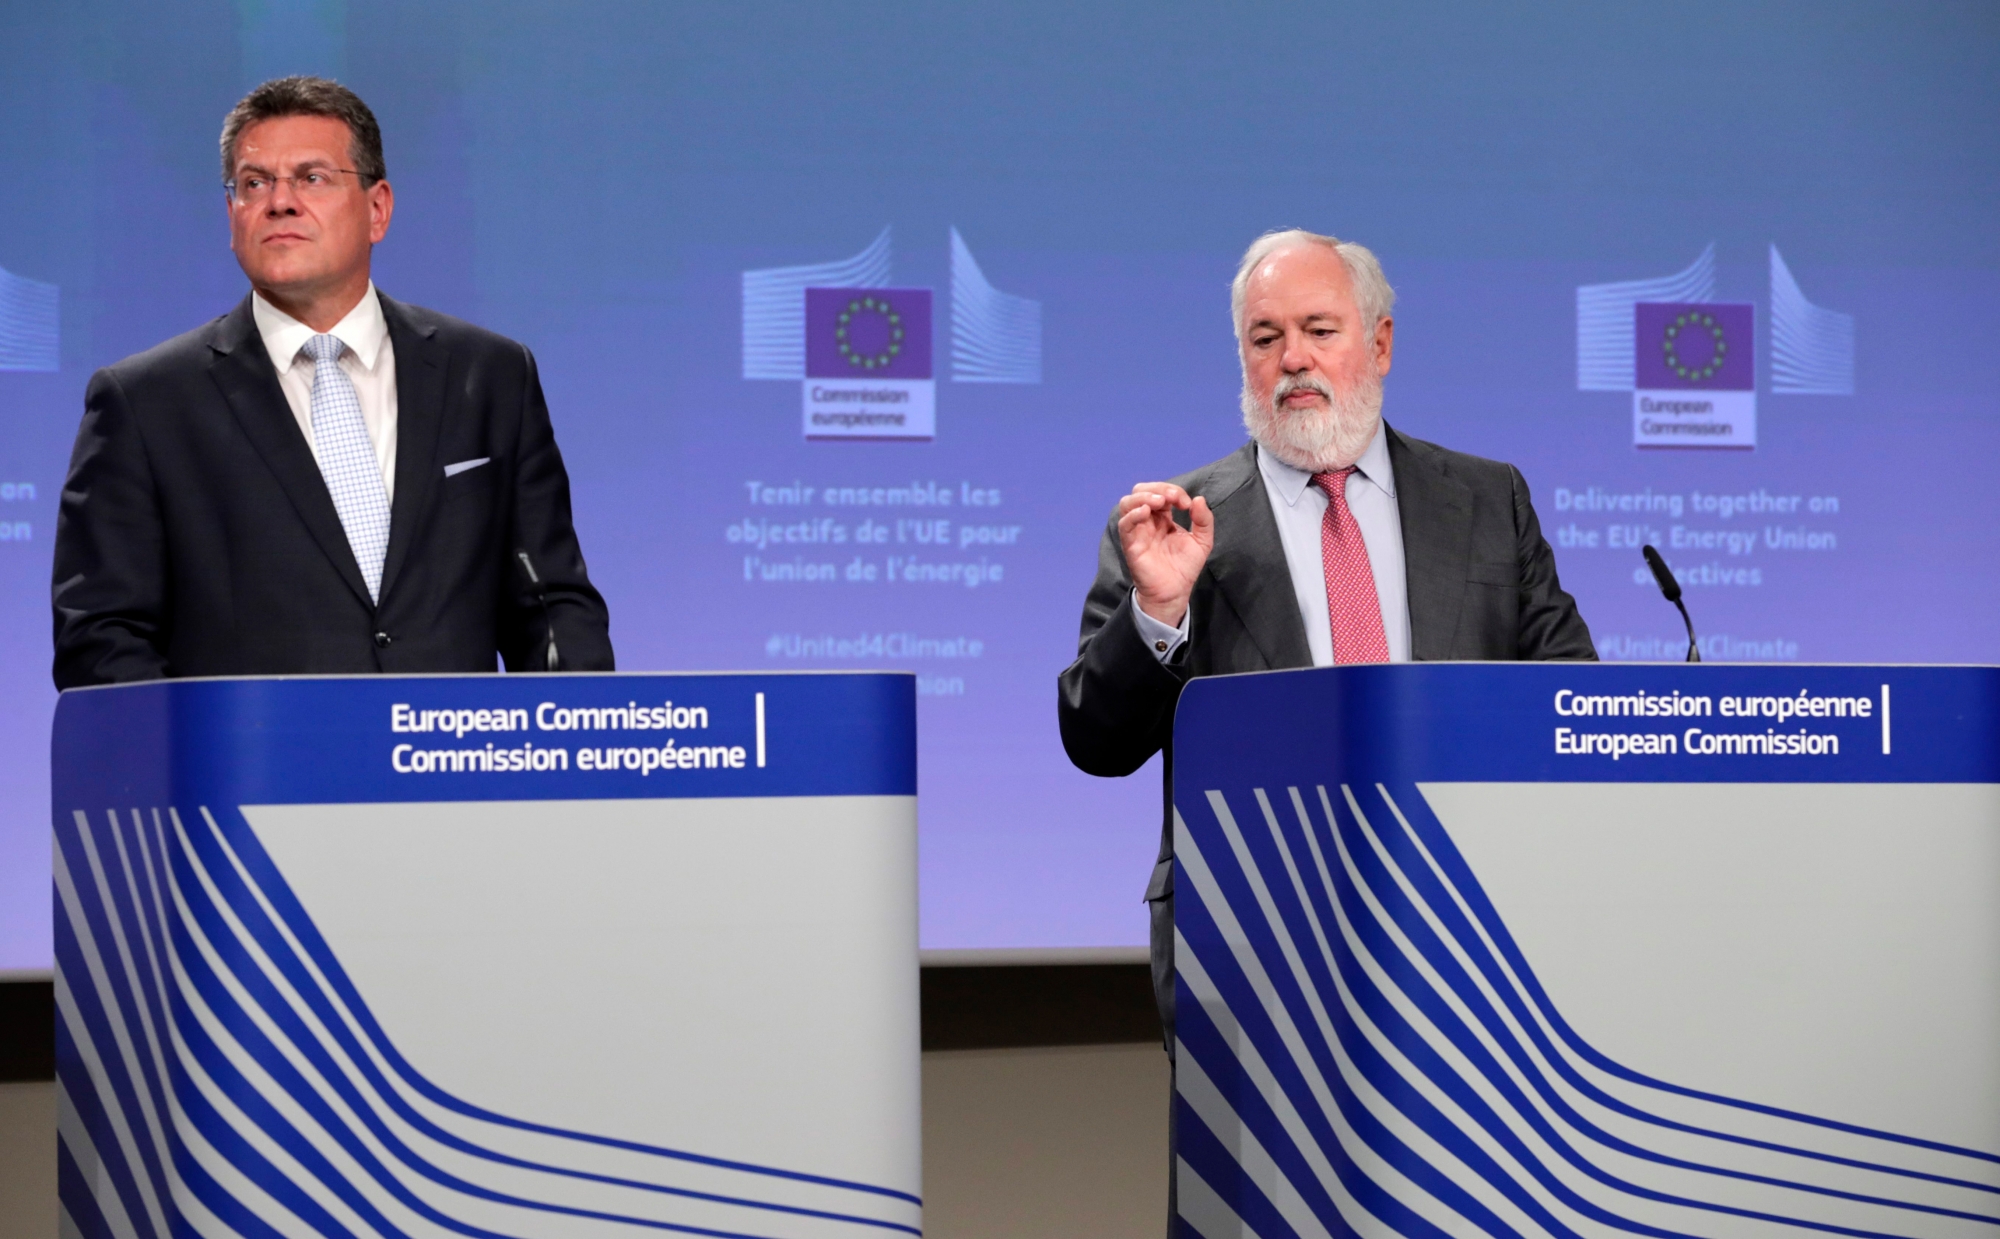 epa07655297 European Commission Vice-President  Maros Sefcovic (L) and European Commissioner for Climate Action and Energy, Miguel Arias Canete (R) give a press conference on National Energy and Climate plans covering the period 2010-2030 in Brussels, Belgium, 18 June 2019. The European Commission presented their assessment of EU member states' draft plans to implement Energy Union objectives, with focus on the agreed EU 2030 energy and climate targets.  EPA/OLIVIER HOSLET BELGIUM EU COMMISSION ENERGY UNION